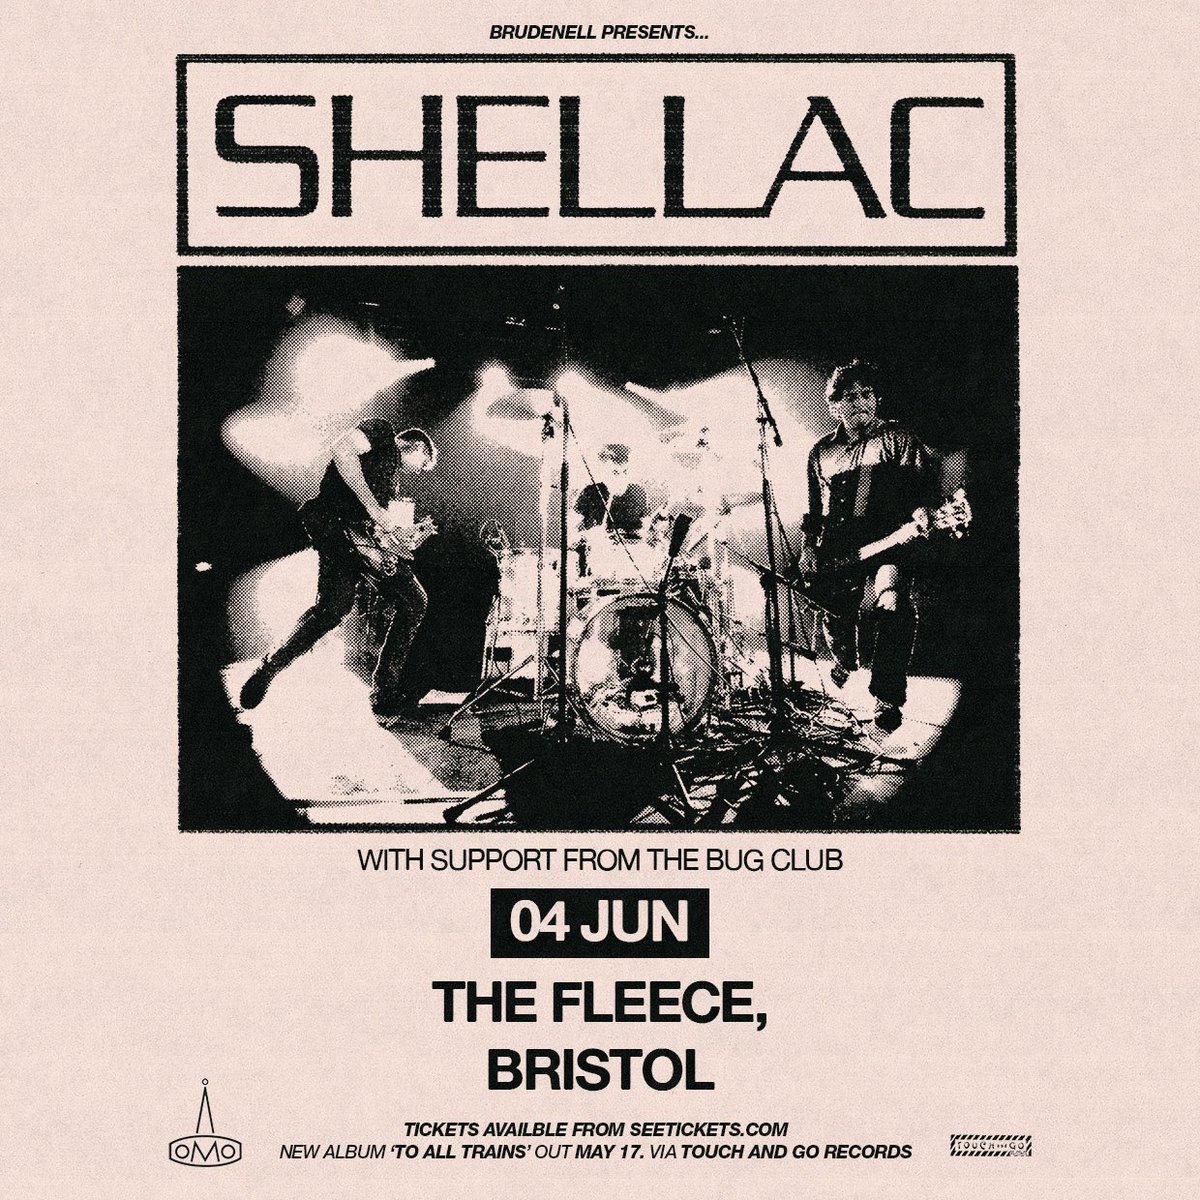 Buzzin to play with Shellac on two of their UK tour dates in Briz and Lundy thanks for having us can't wait to rock our toes off like xxxxxxxxxx